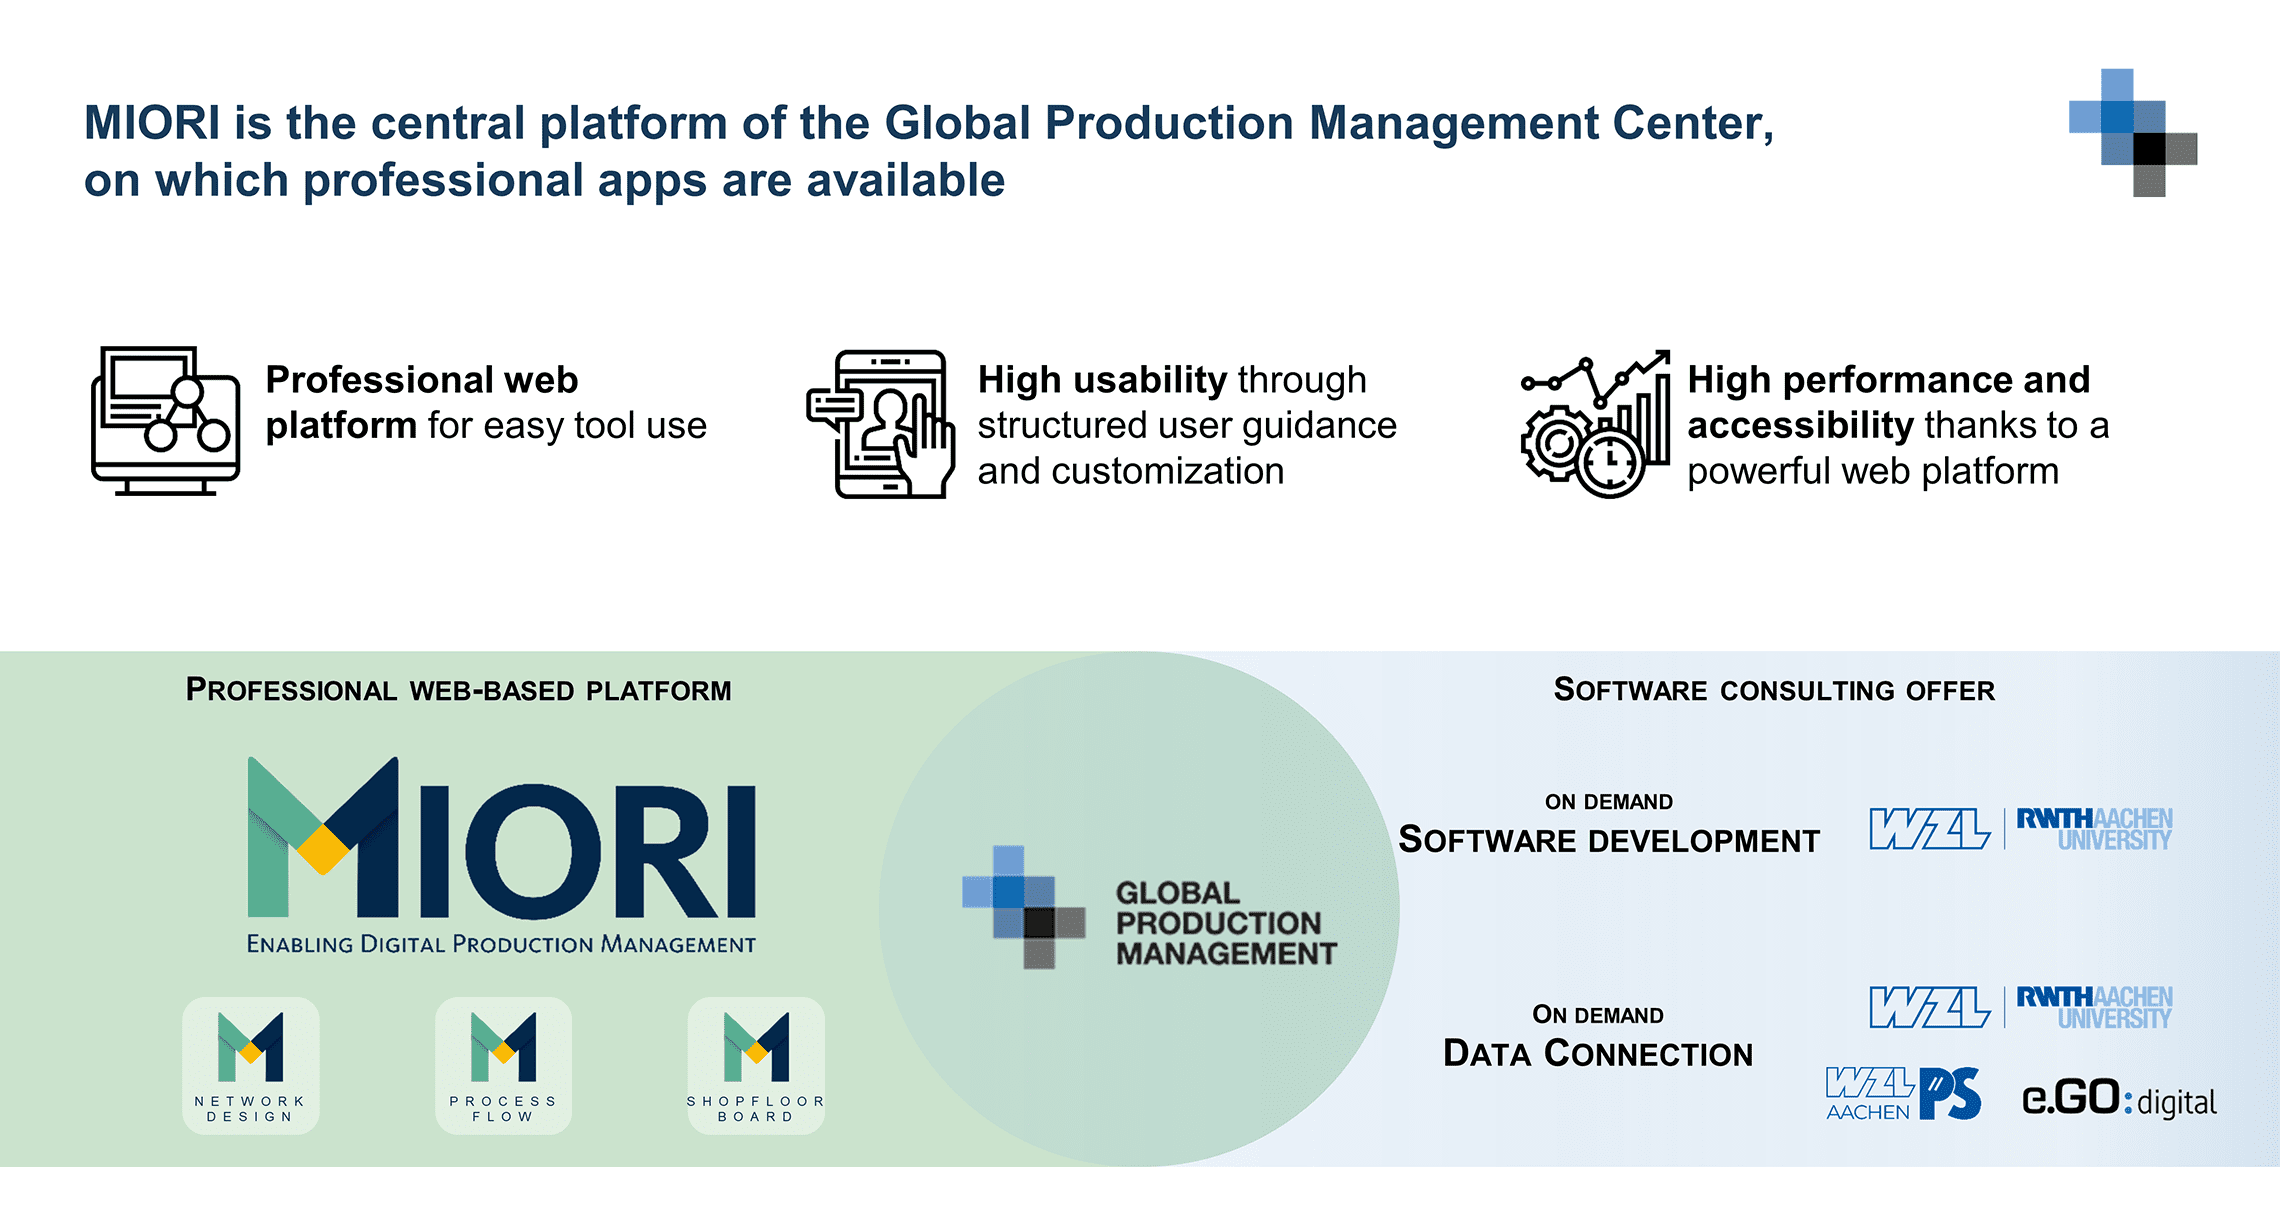 MIORI-is-the-central-platform-of-the-Global-Production-Management-Center-on-which-professional-apps-are-available First GPMC Annual Meeting 